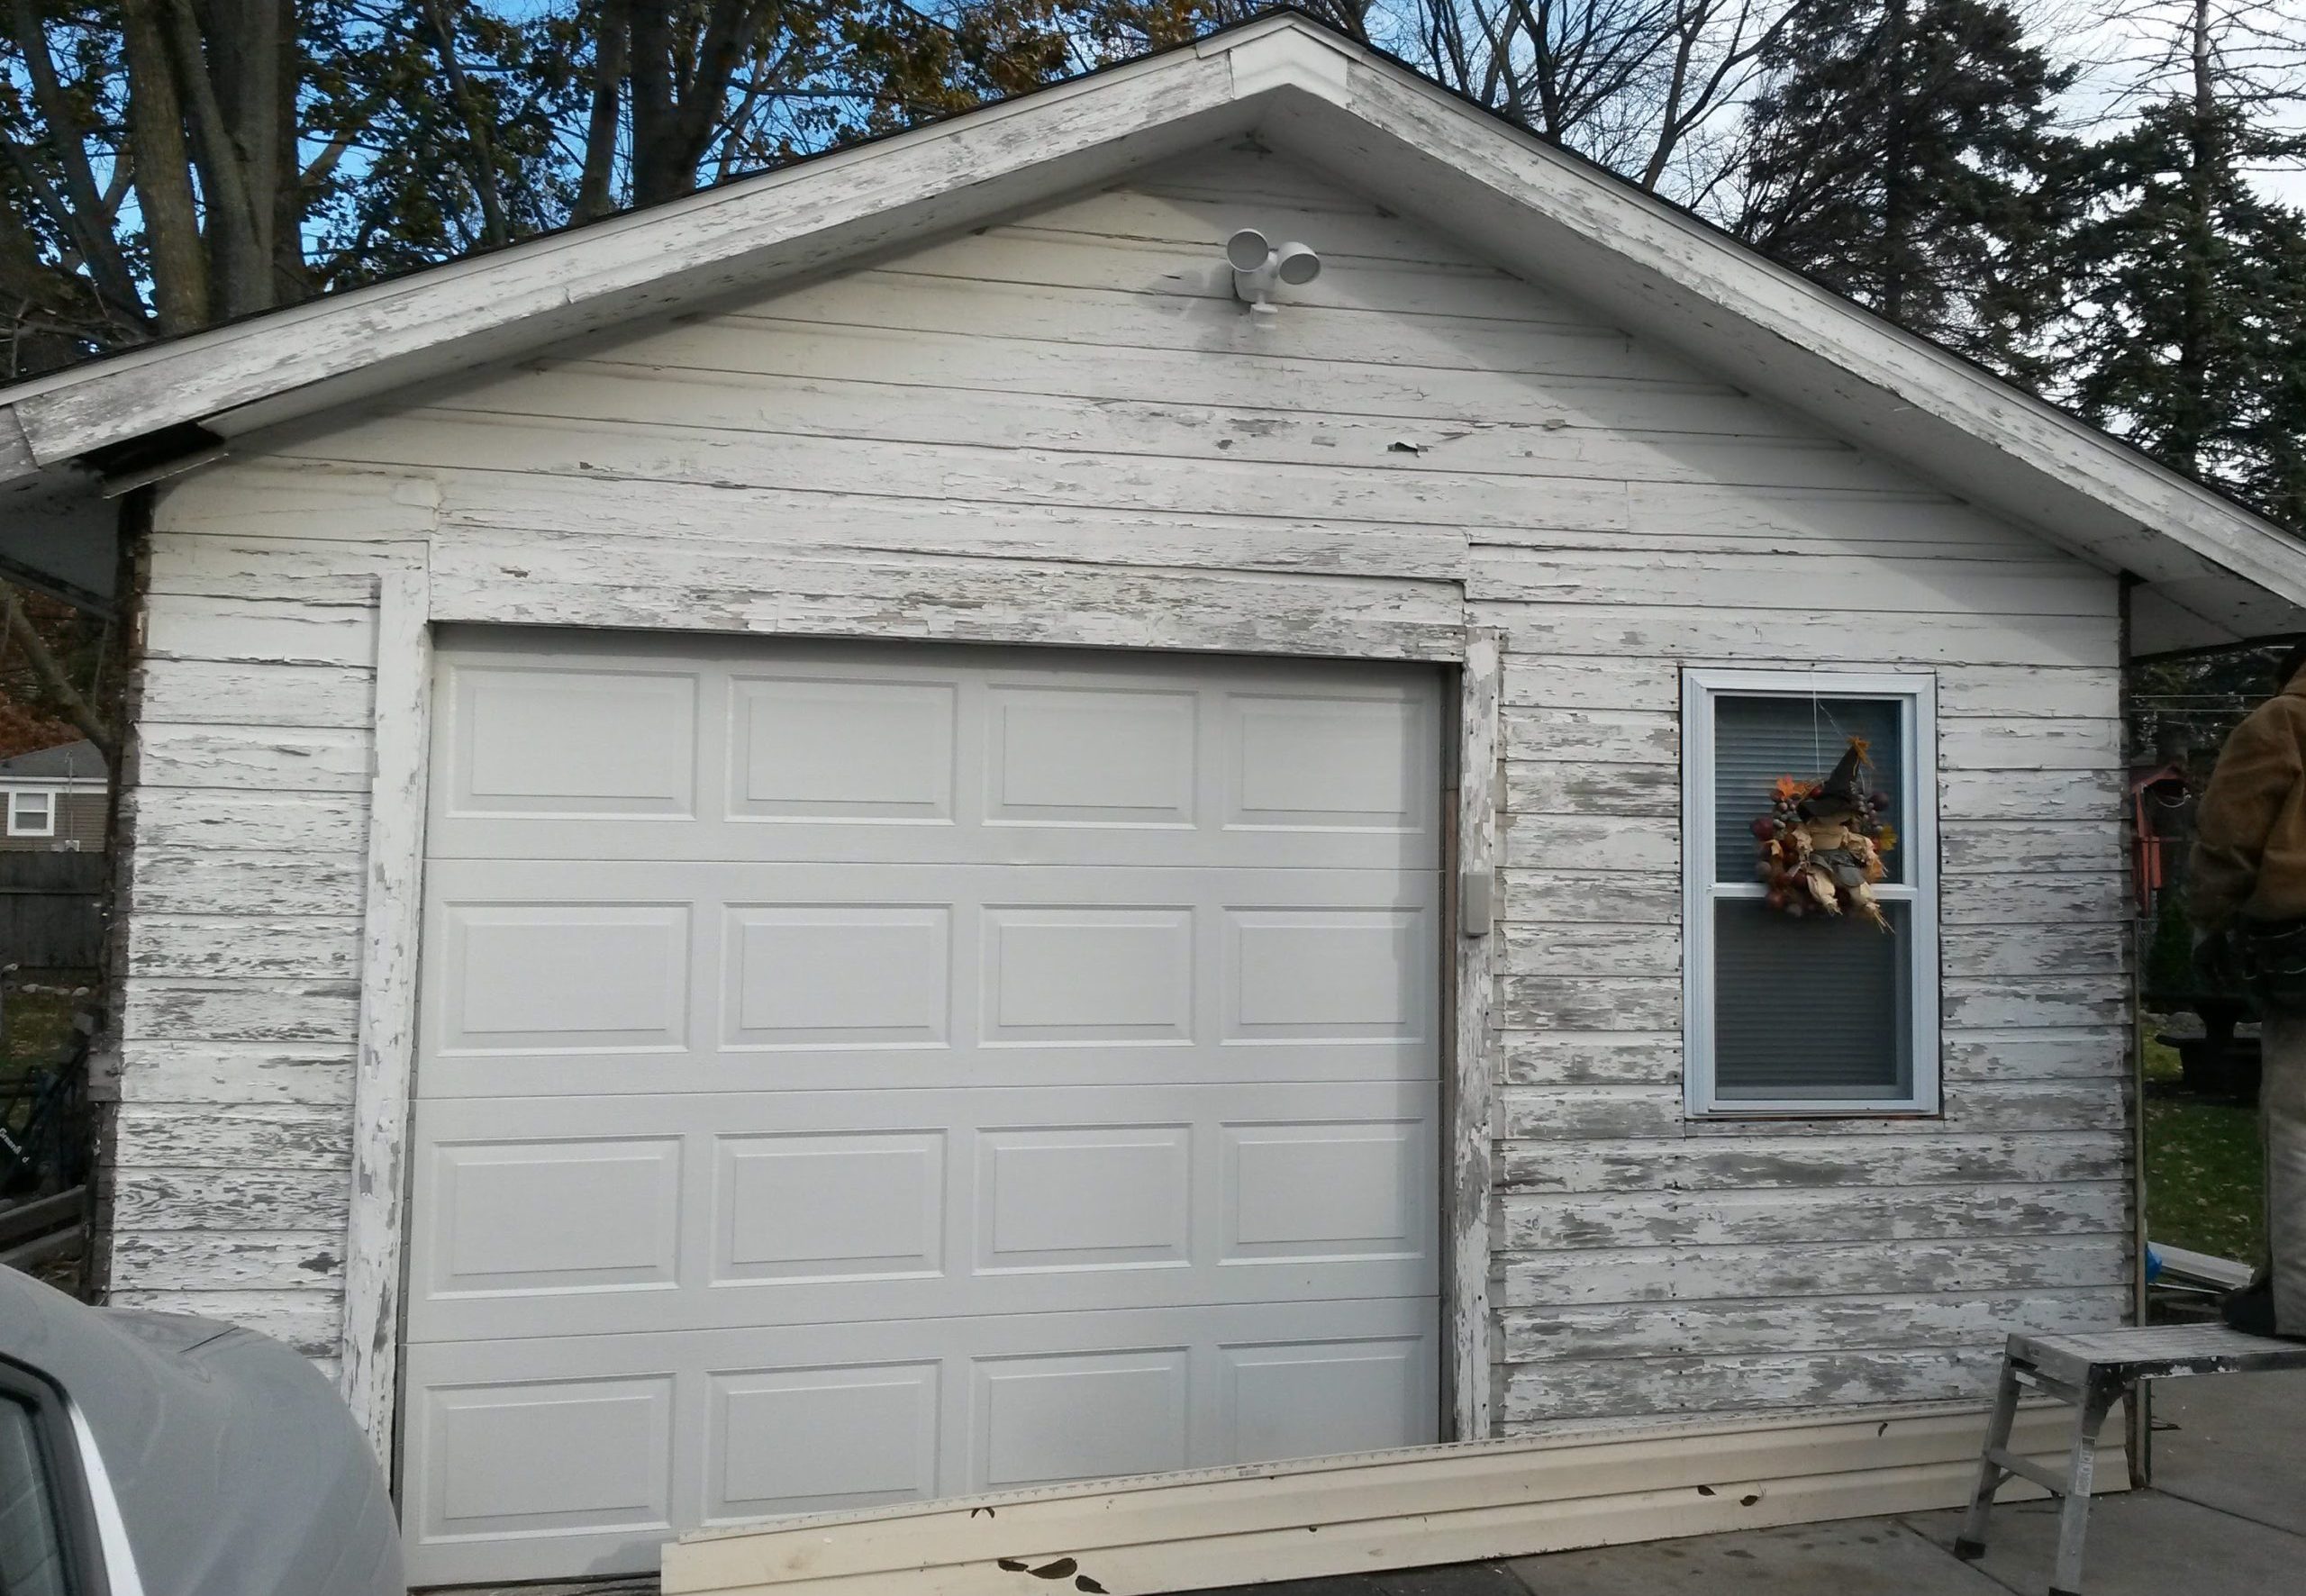 Royal Oak Garage Remodel with New Garage Door and Siding - before